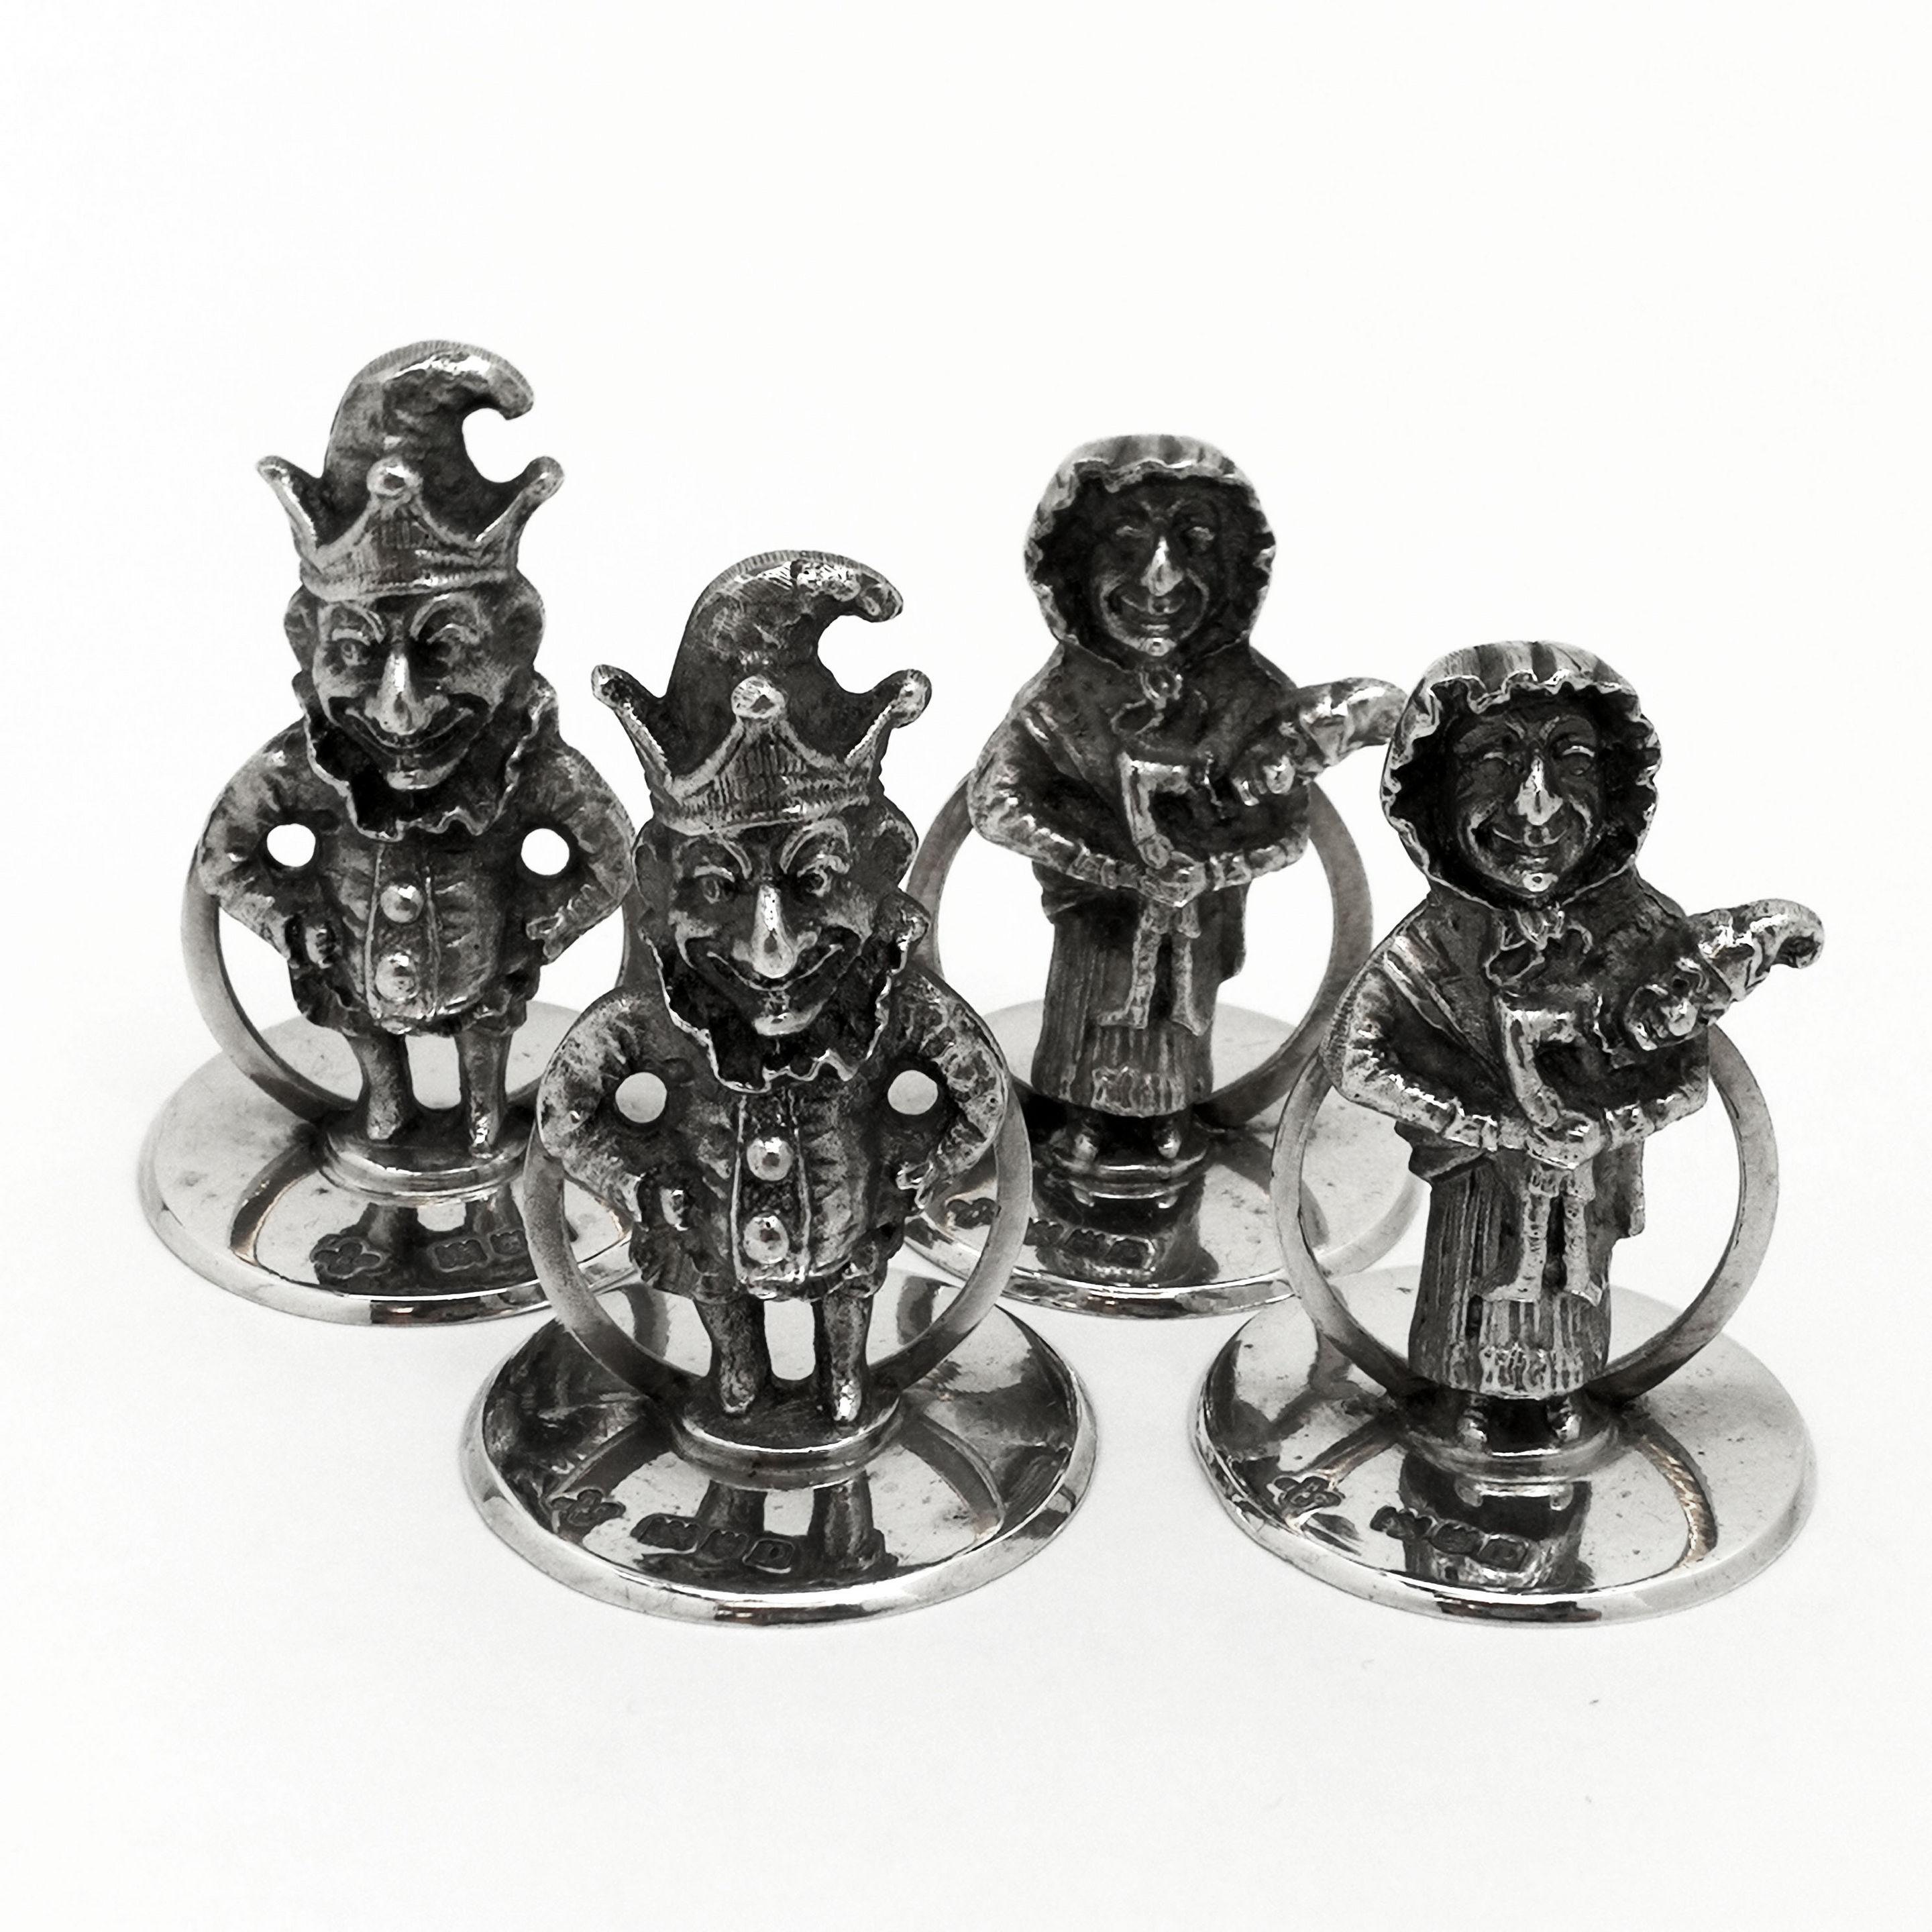 A wonderful set of 4 Solid Silver Menu Holders / Place Card Holders in the shape of the iconic Punch & Judy. The Set has two of each character. Each stands on a round silver base. The figures are cast with a wonderful attention to detail and are